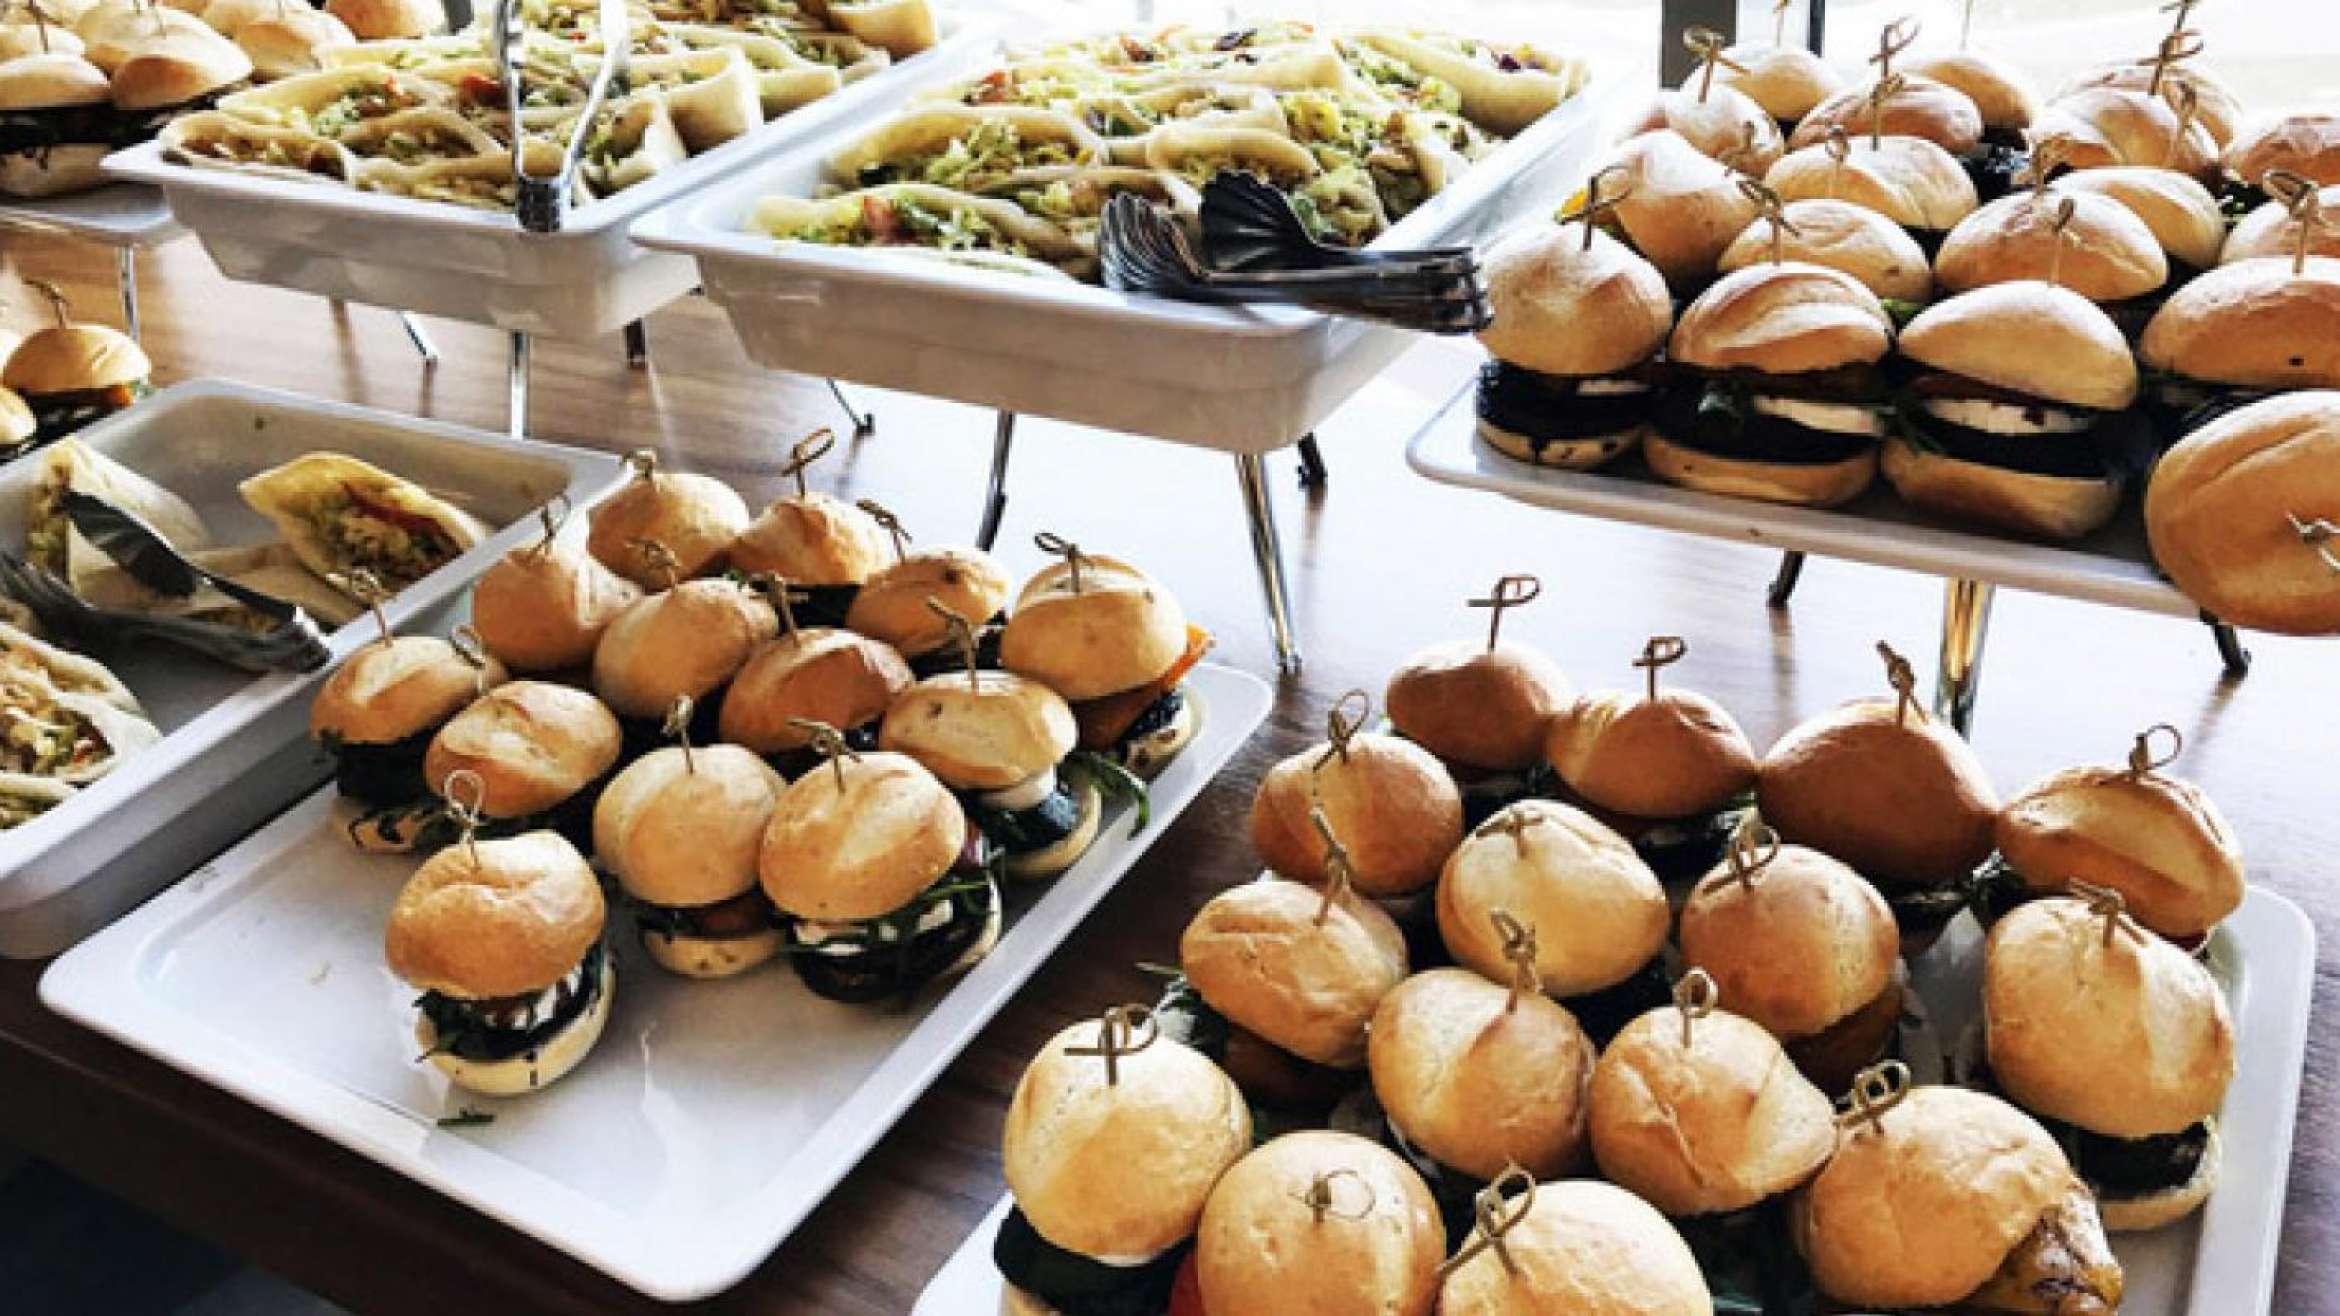 Buffet of different types of sliders to illustrate a food footprint for climate change